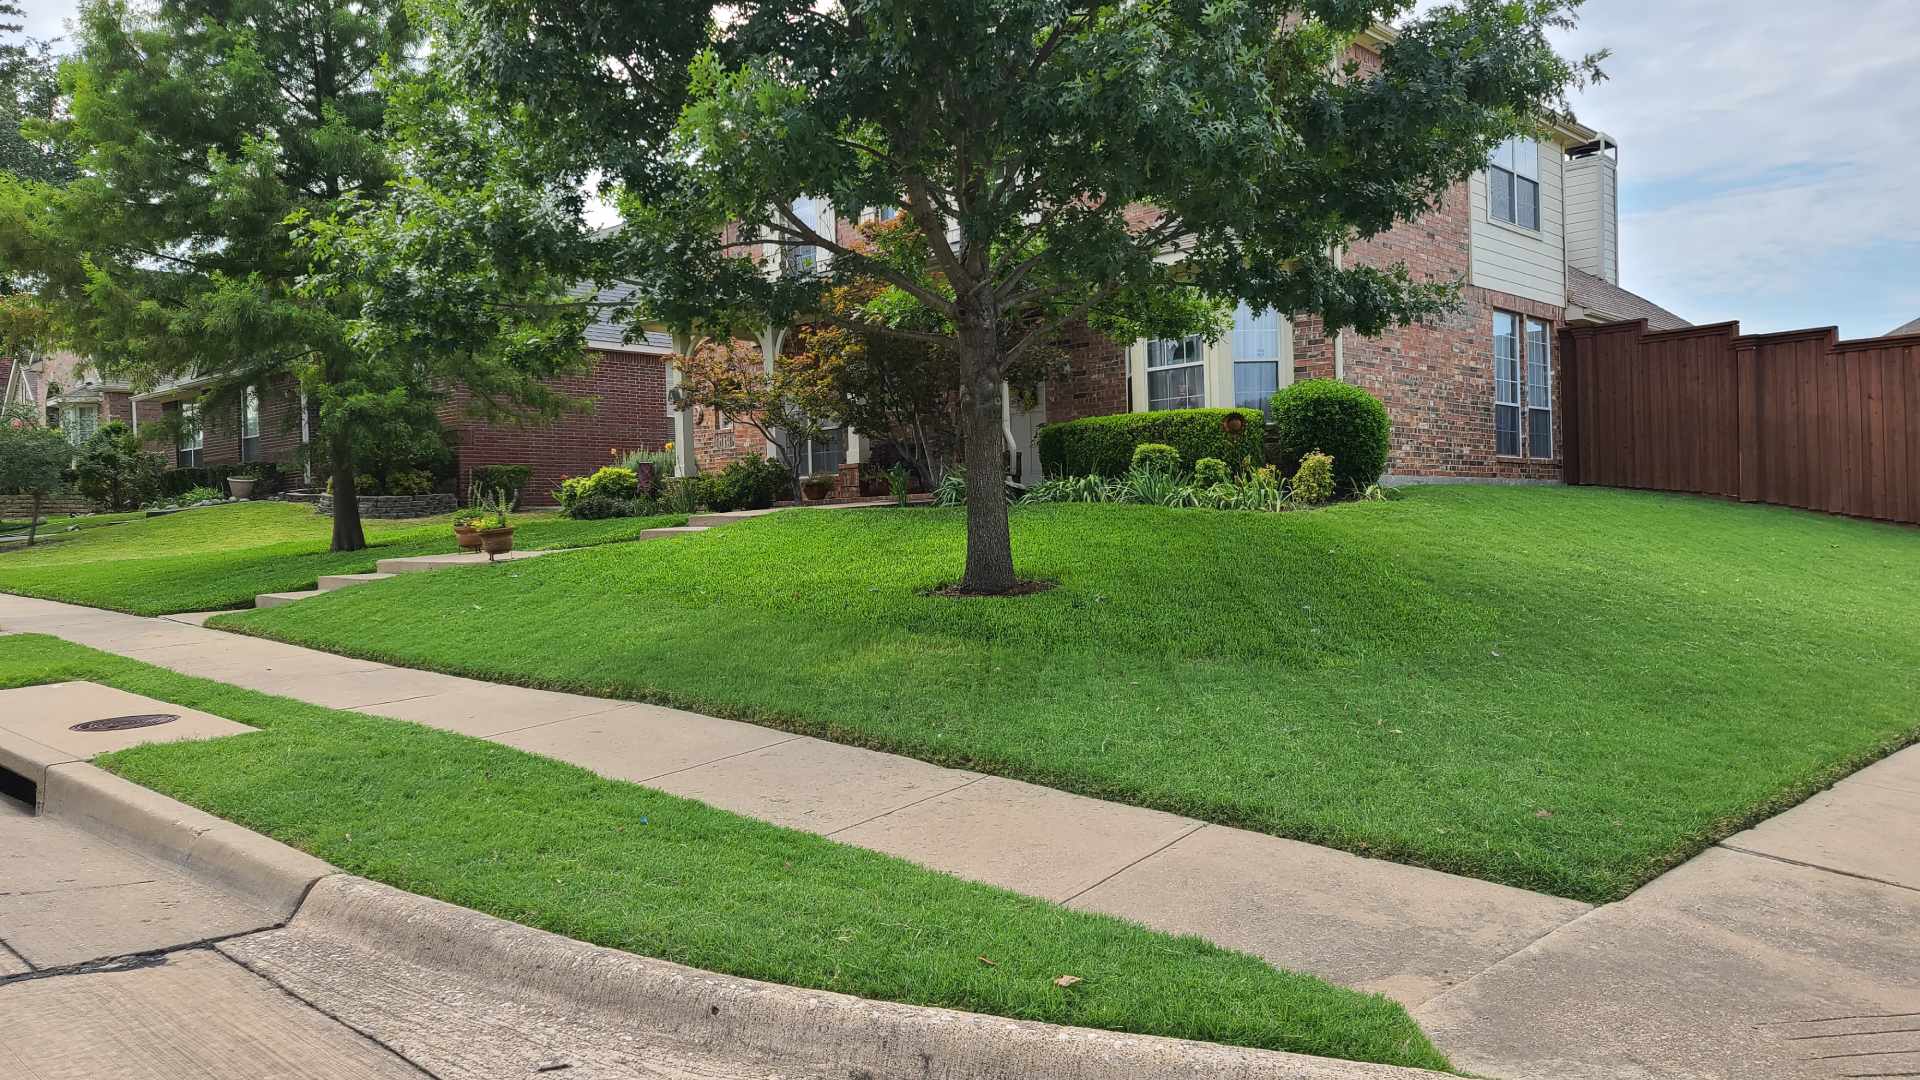 Client's lawn maintained by workers from Arboreal in Rockwall, TX.